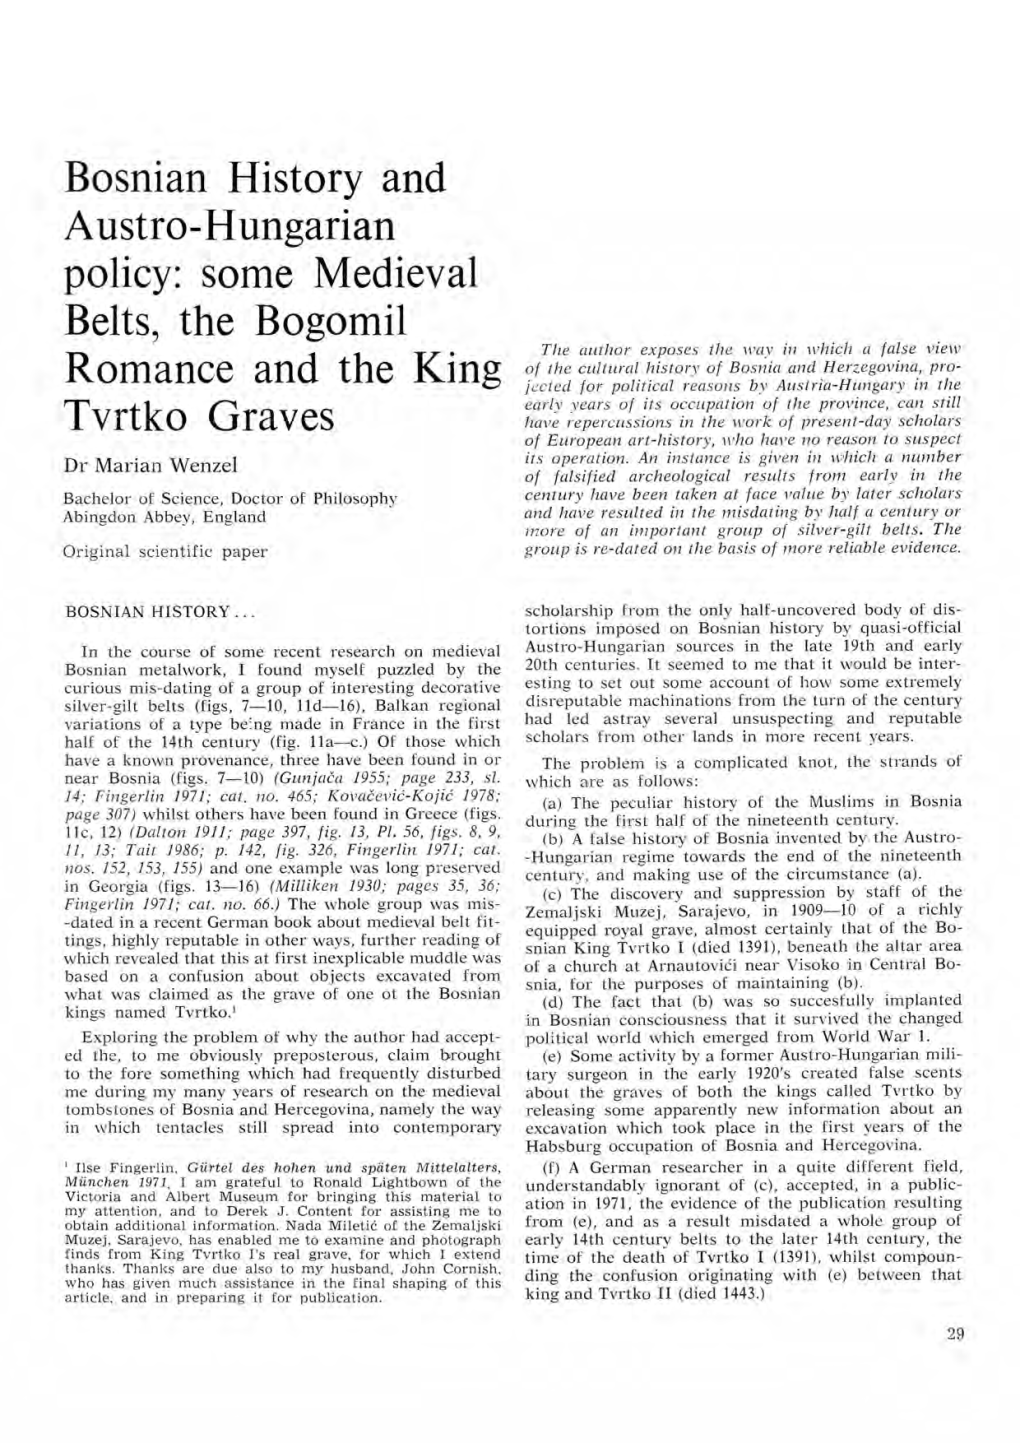 Policy: Some Medieval